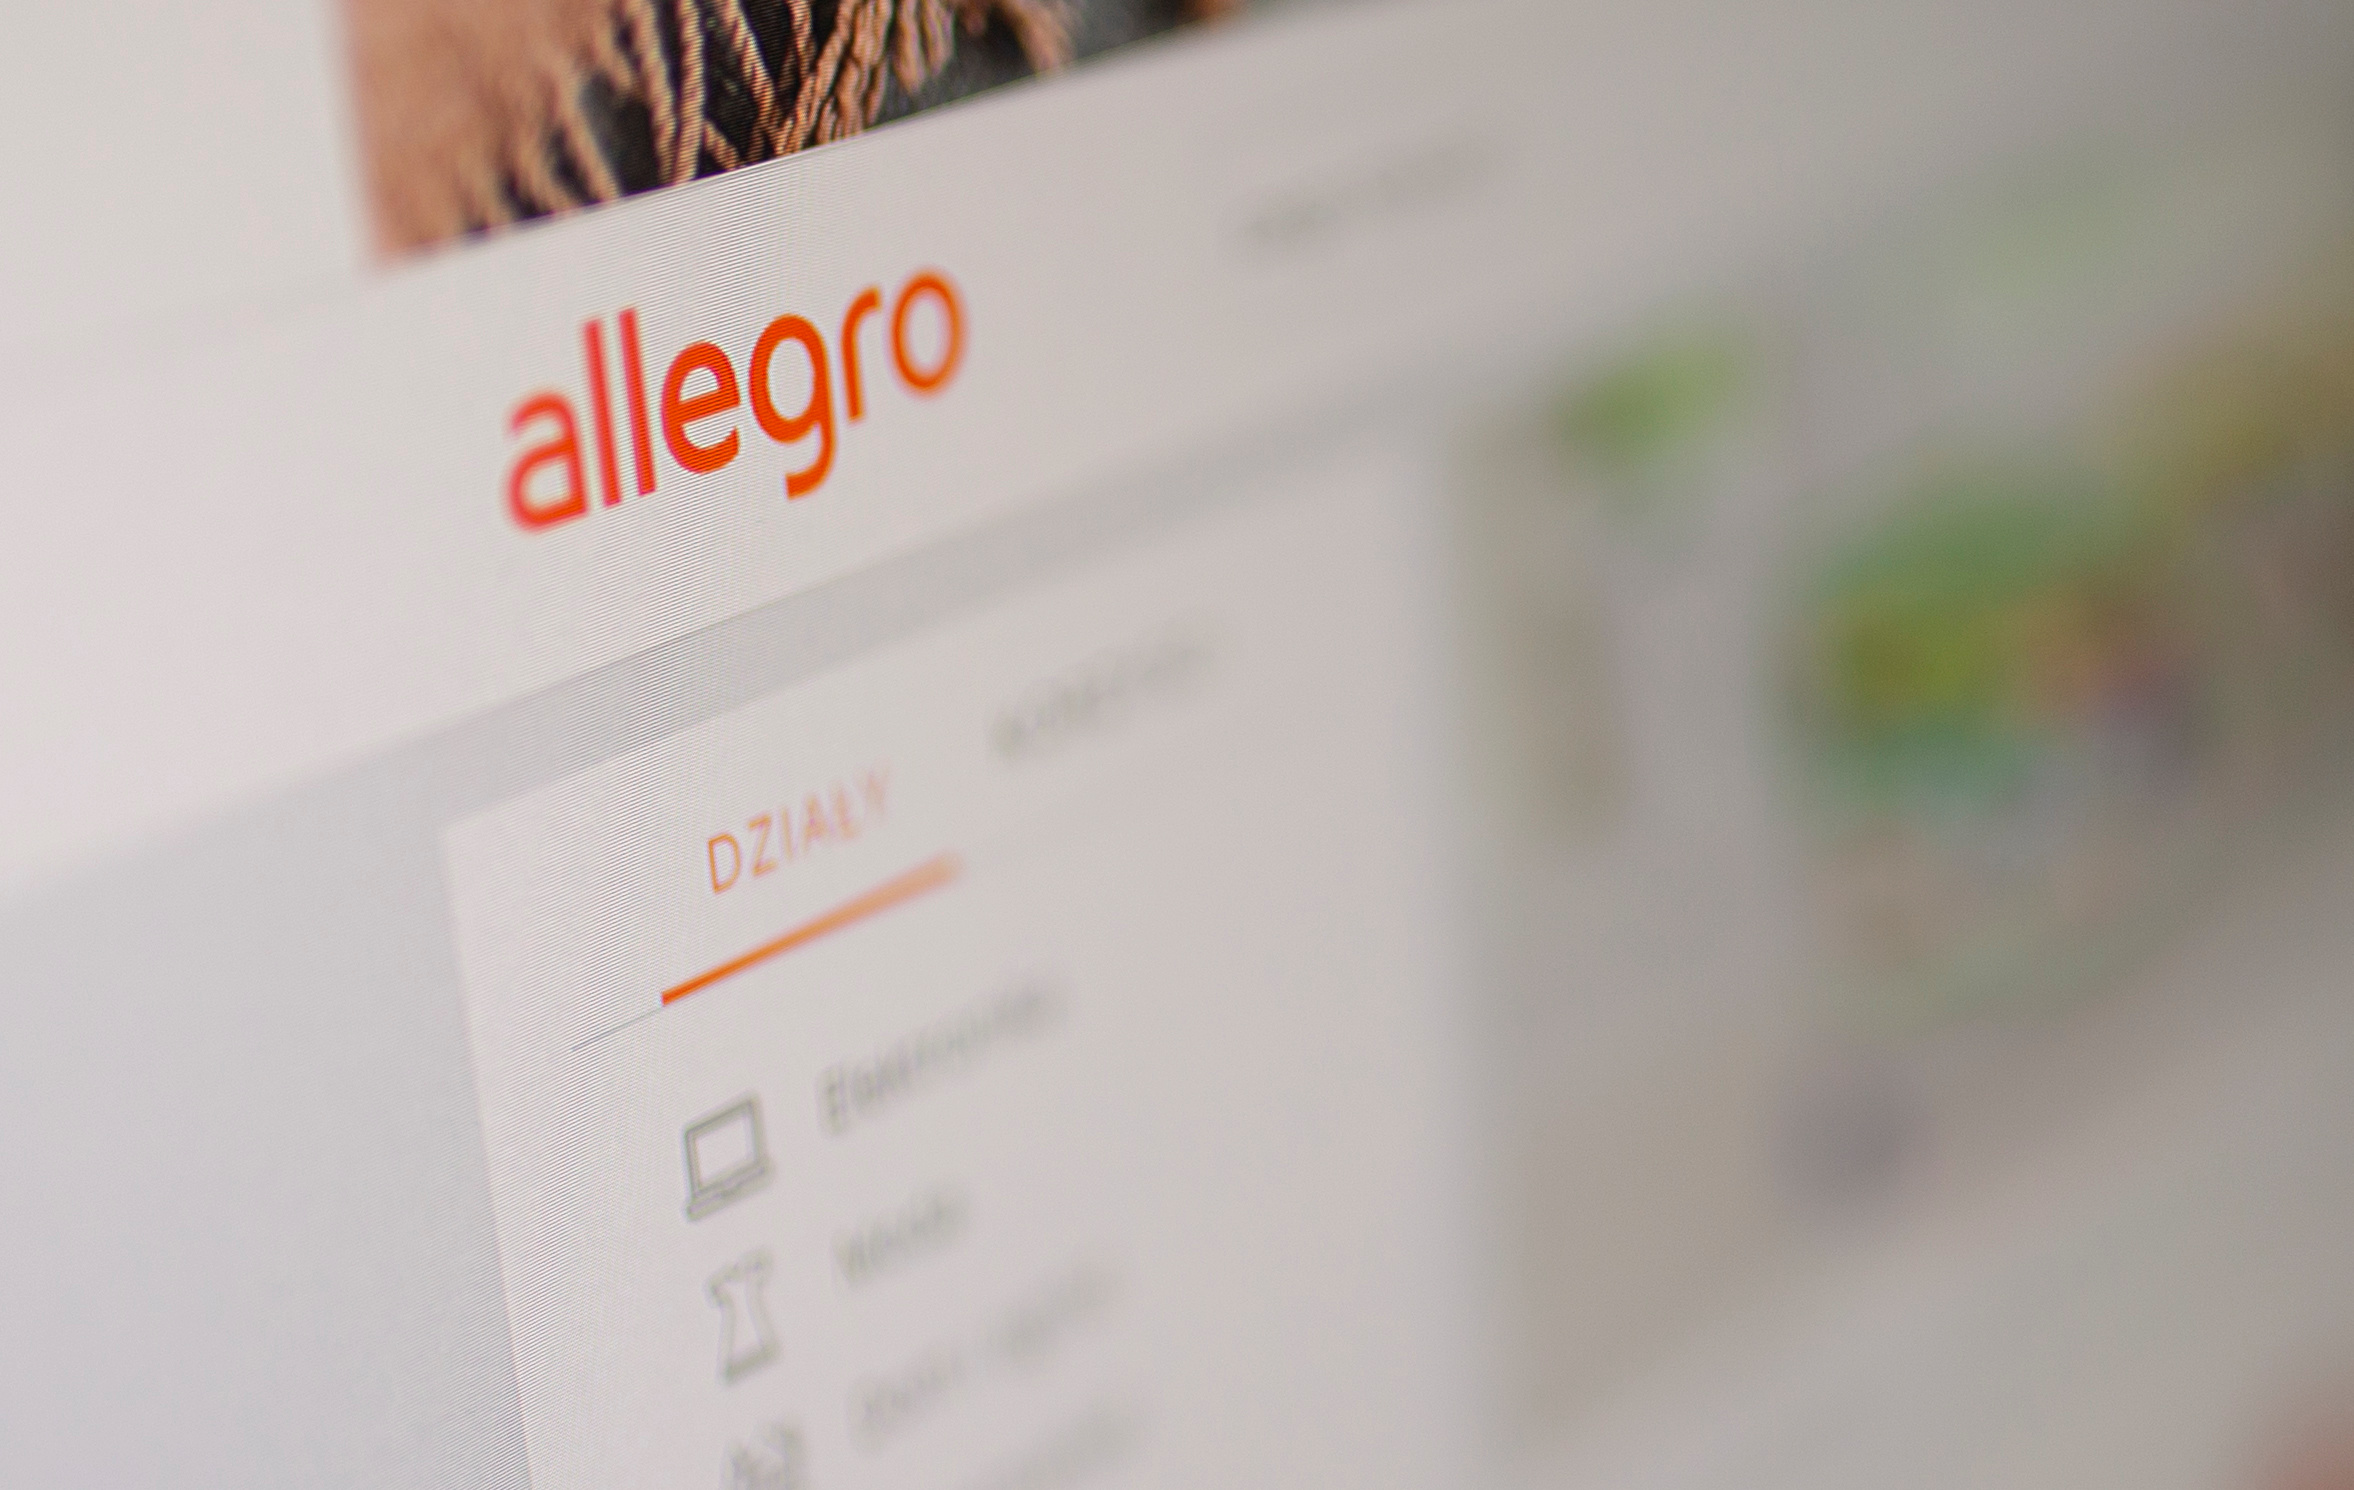 Allegro website is displayed in this illustration